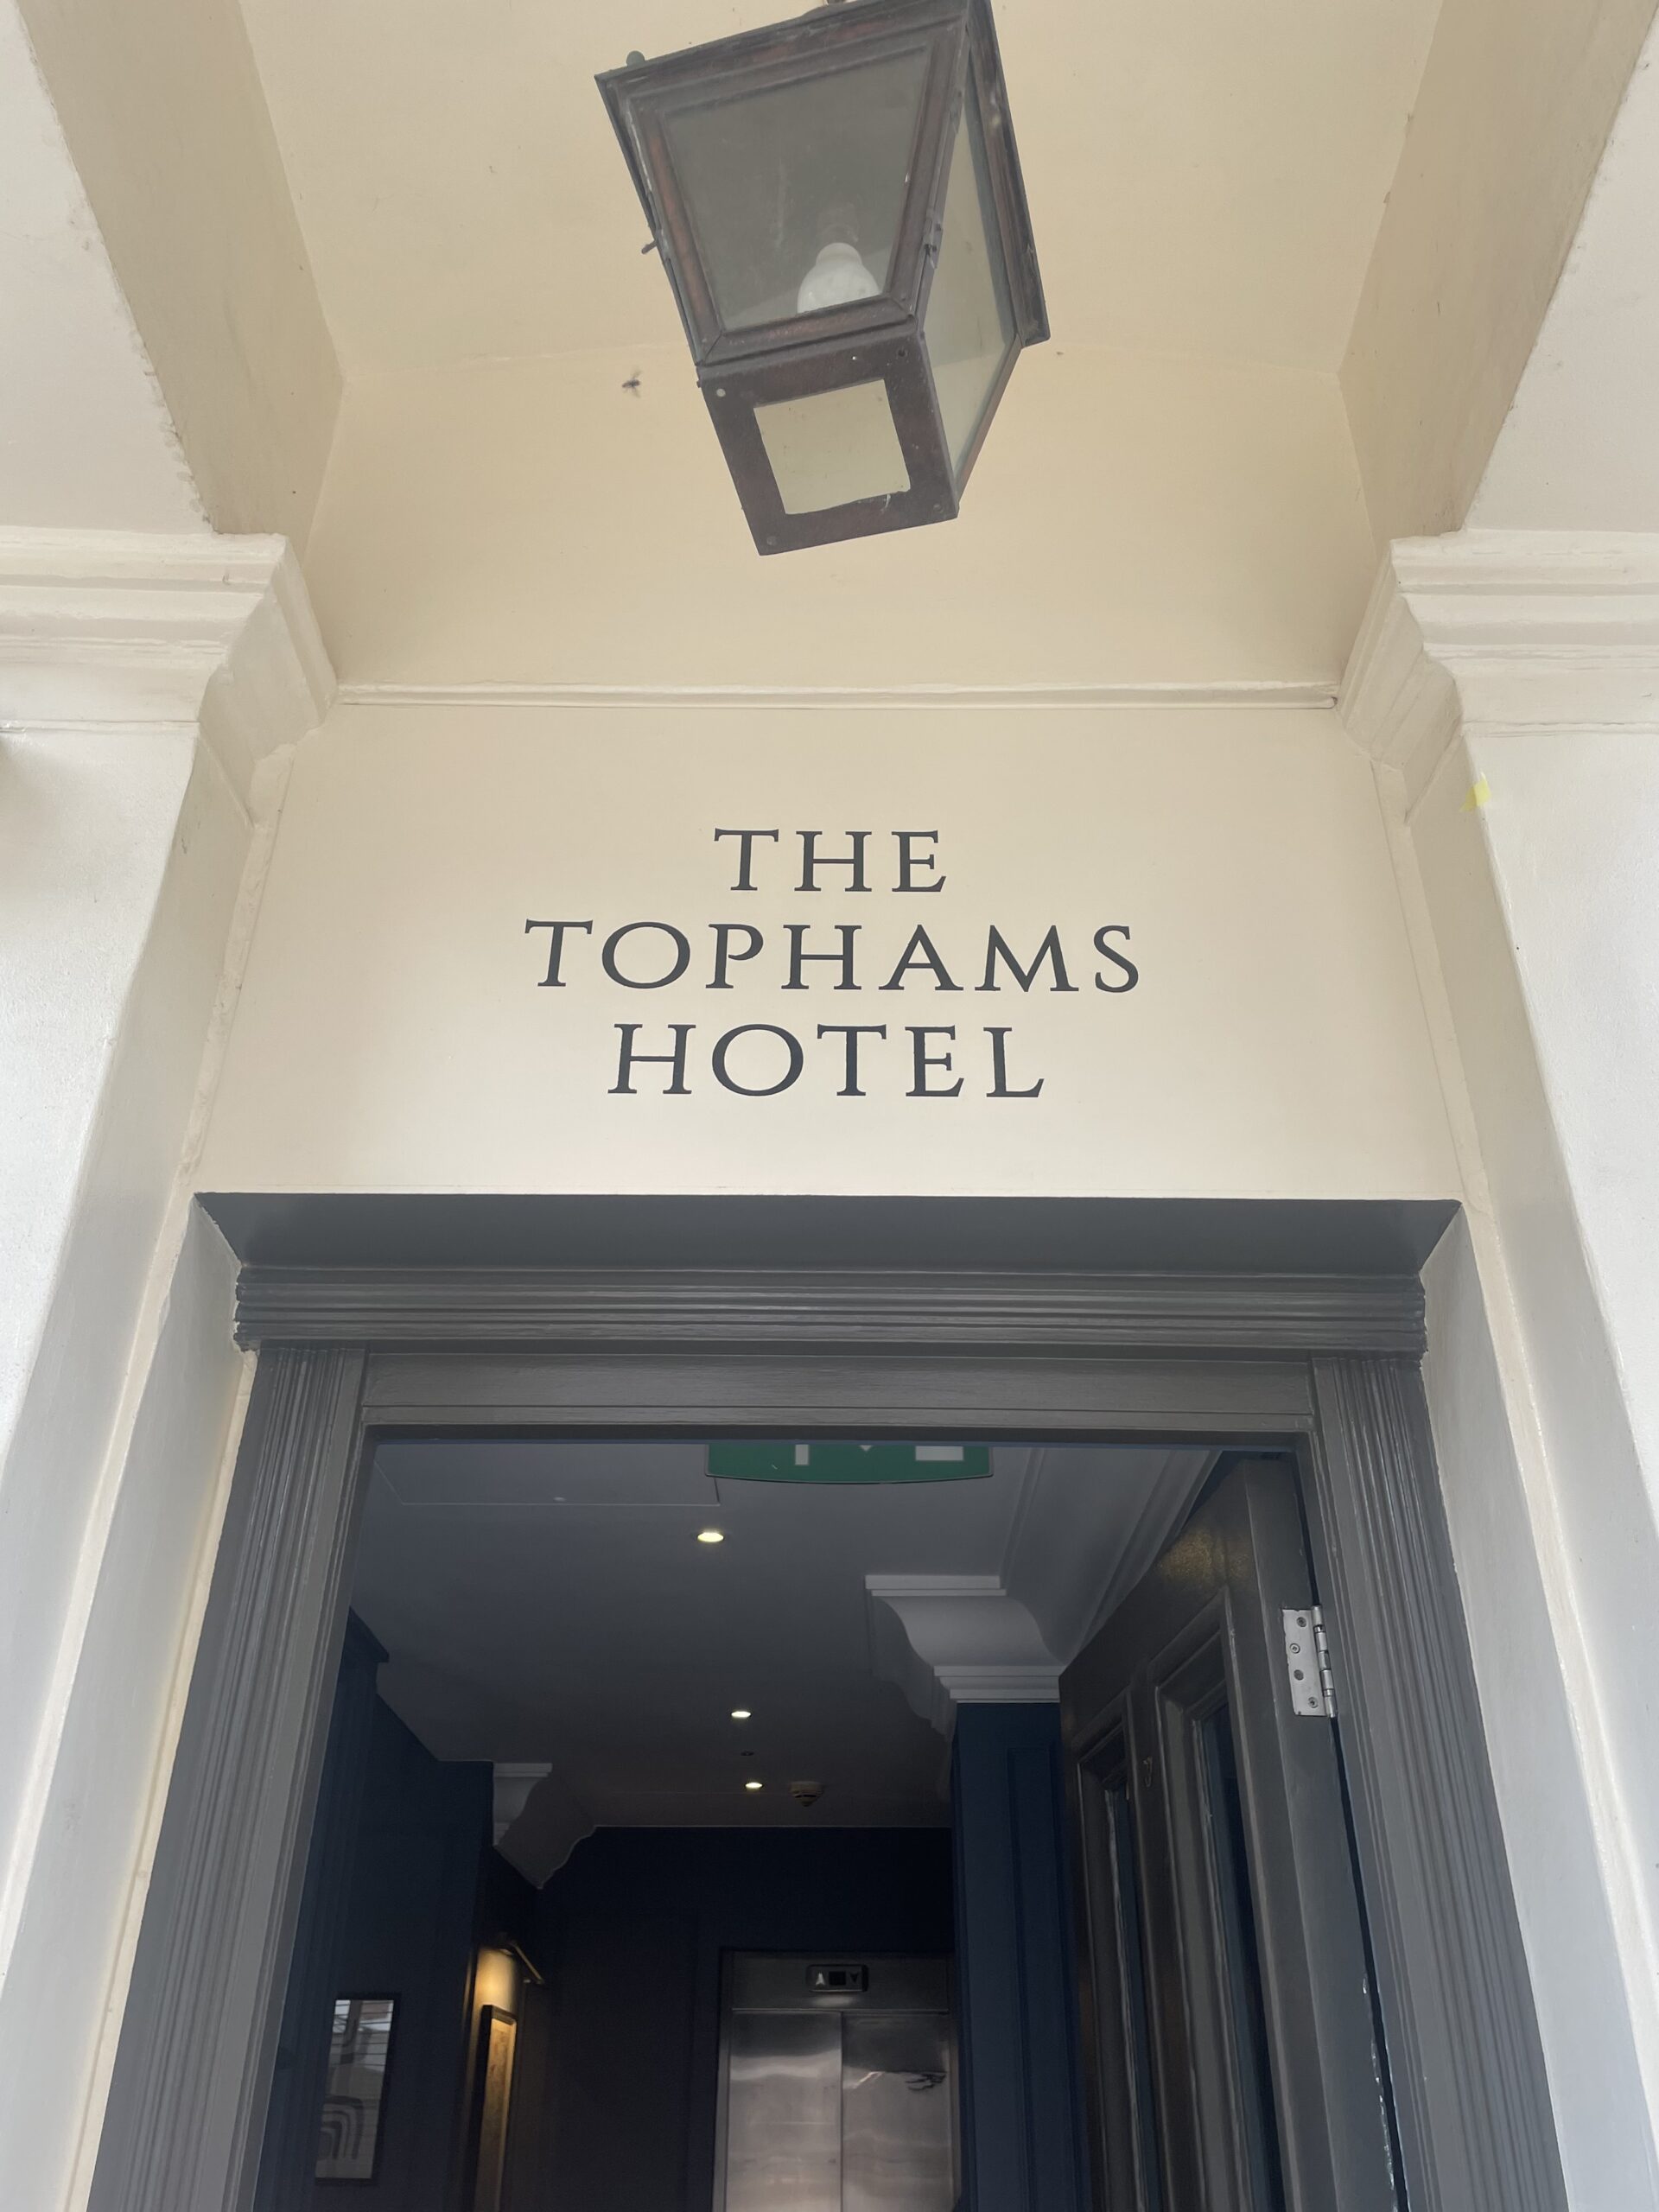 Hotel title wayfinding signage by hand painting NGS London Sign Writers Designers Tophams Hotel Chelsea & City of London Club.